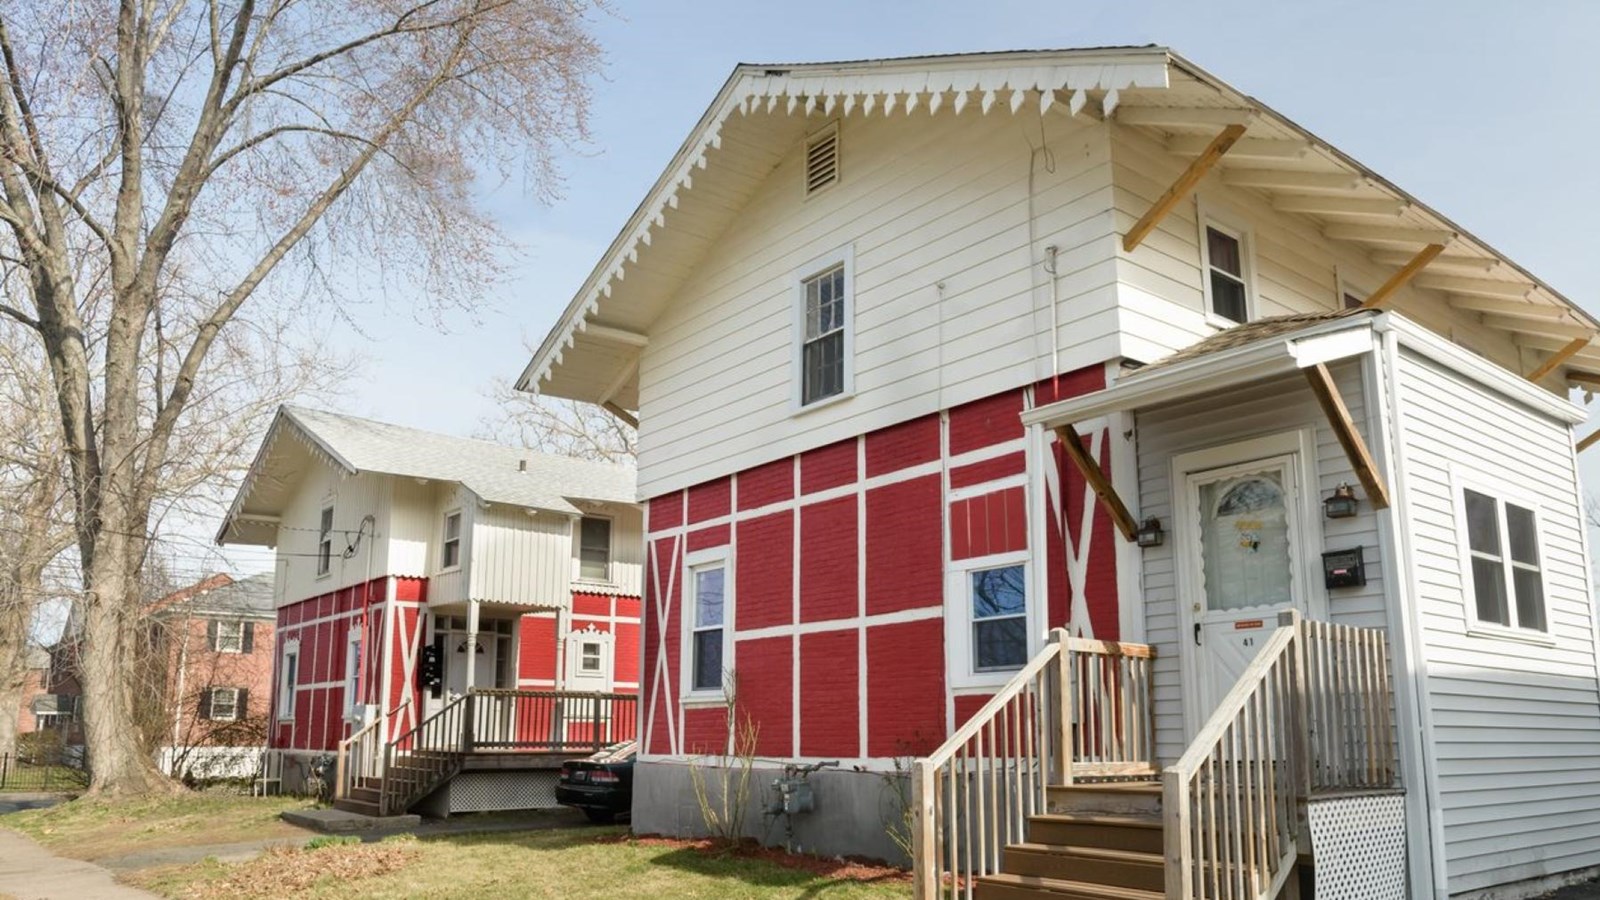 A two story, red and white house with a gabled metal roof and decorative bargeboard.